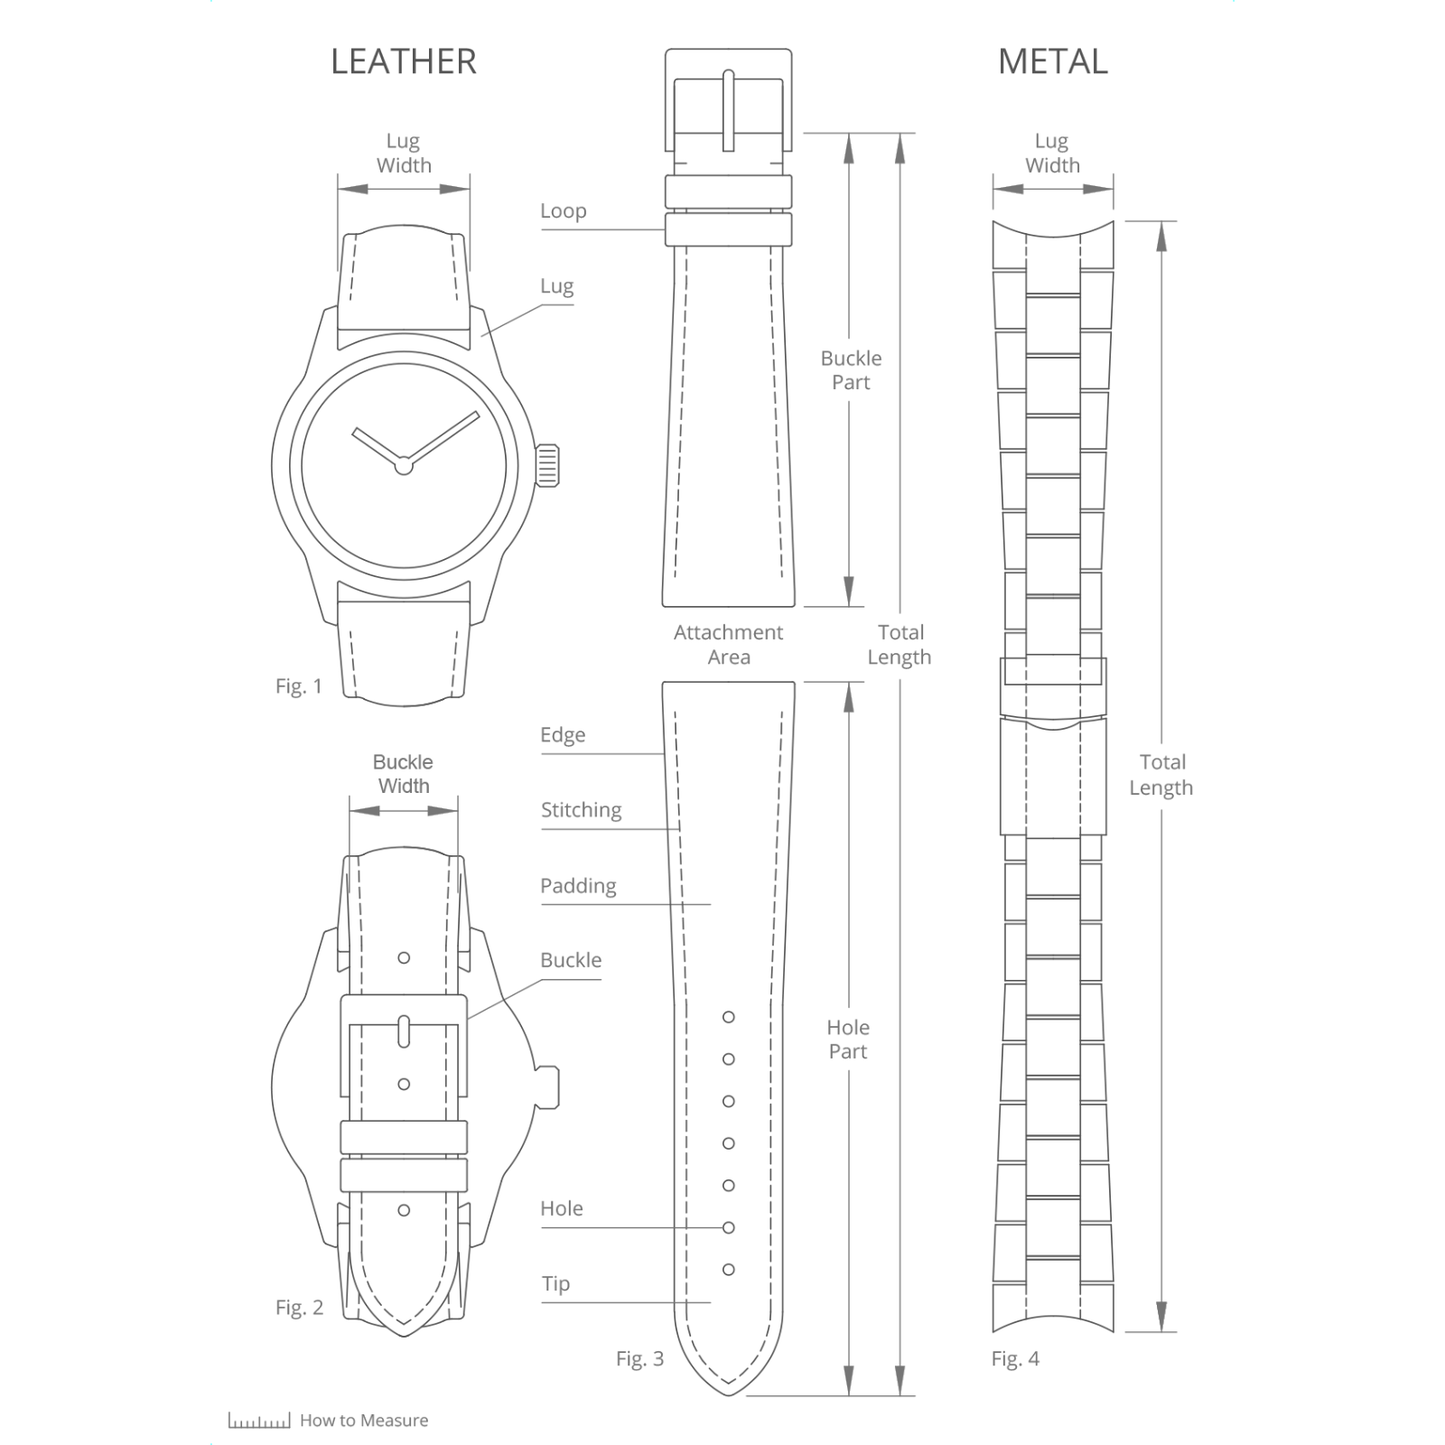 DBLACK [ALBAF] THICK - LEATHER WATCH STRAP // FOR 20MM, 22MM, OR 24MM (CHOOSE YOUR SIZE & COLOR)